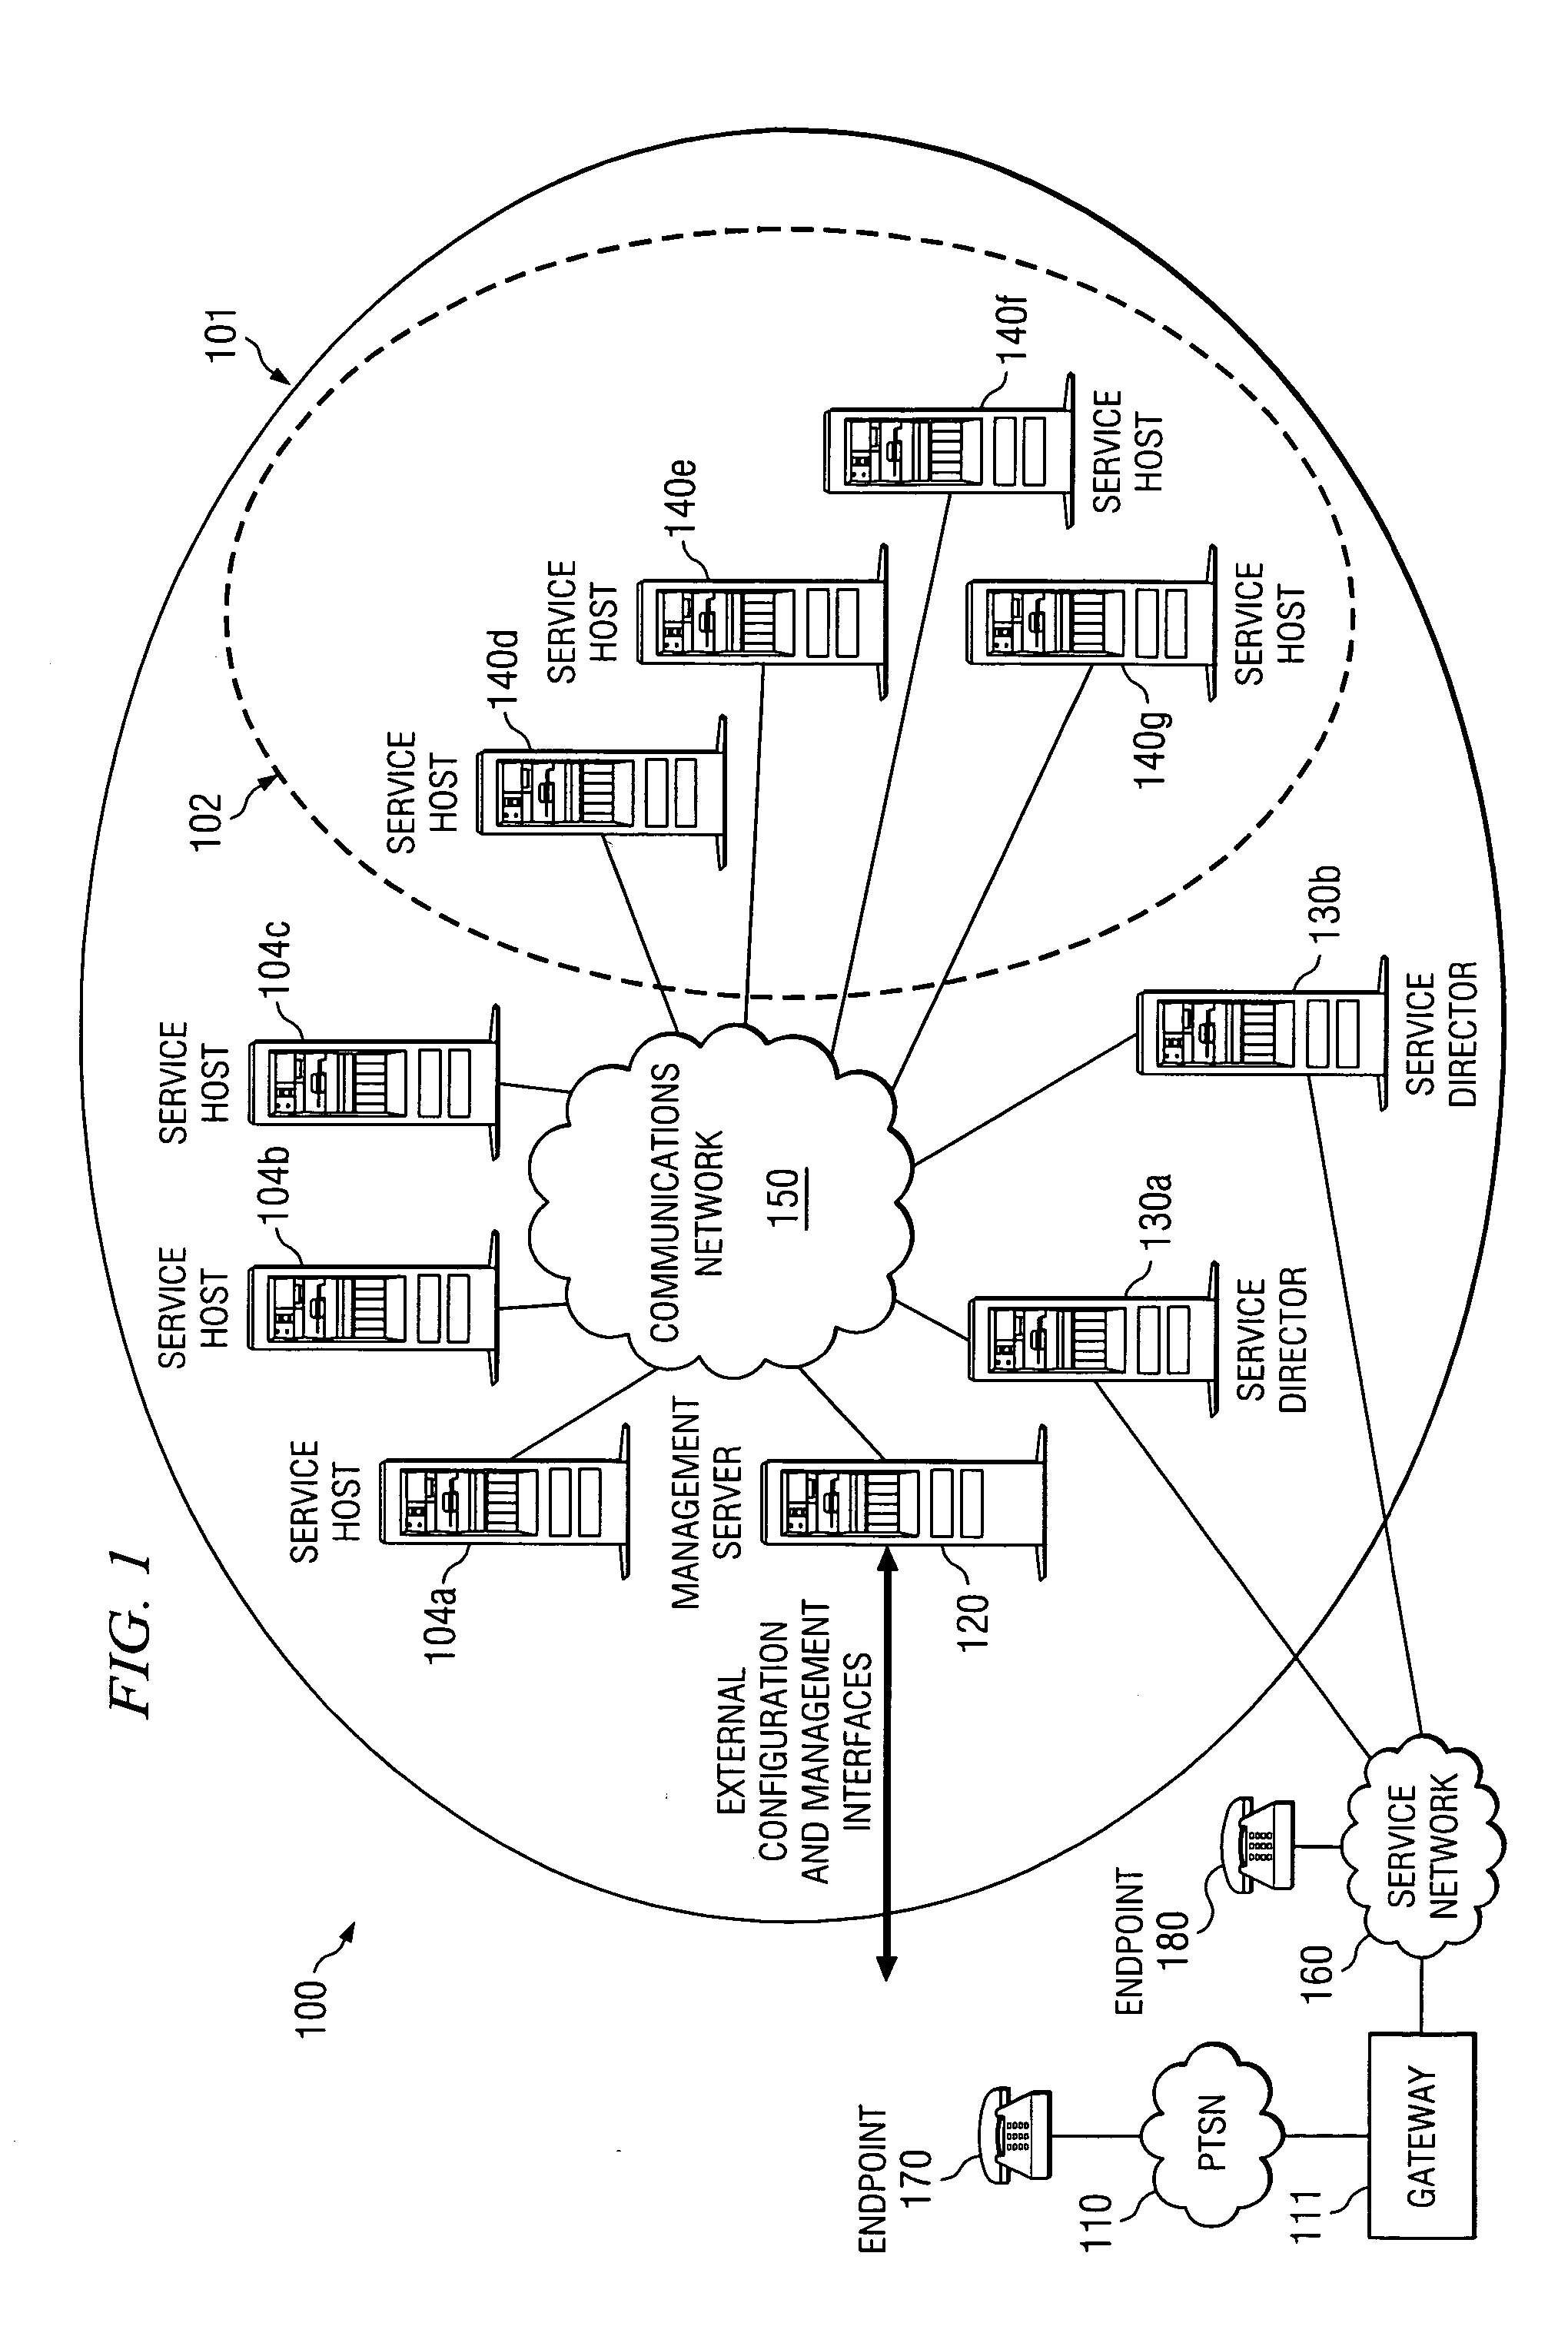 Systems and methods providing high availability for distributed systems